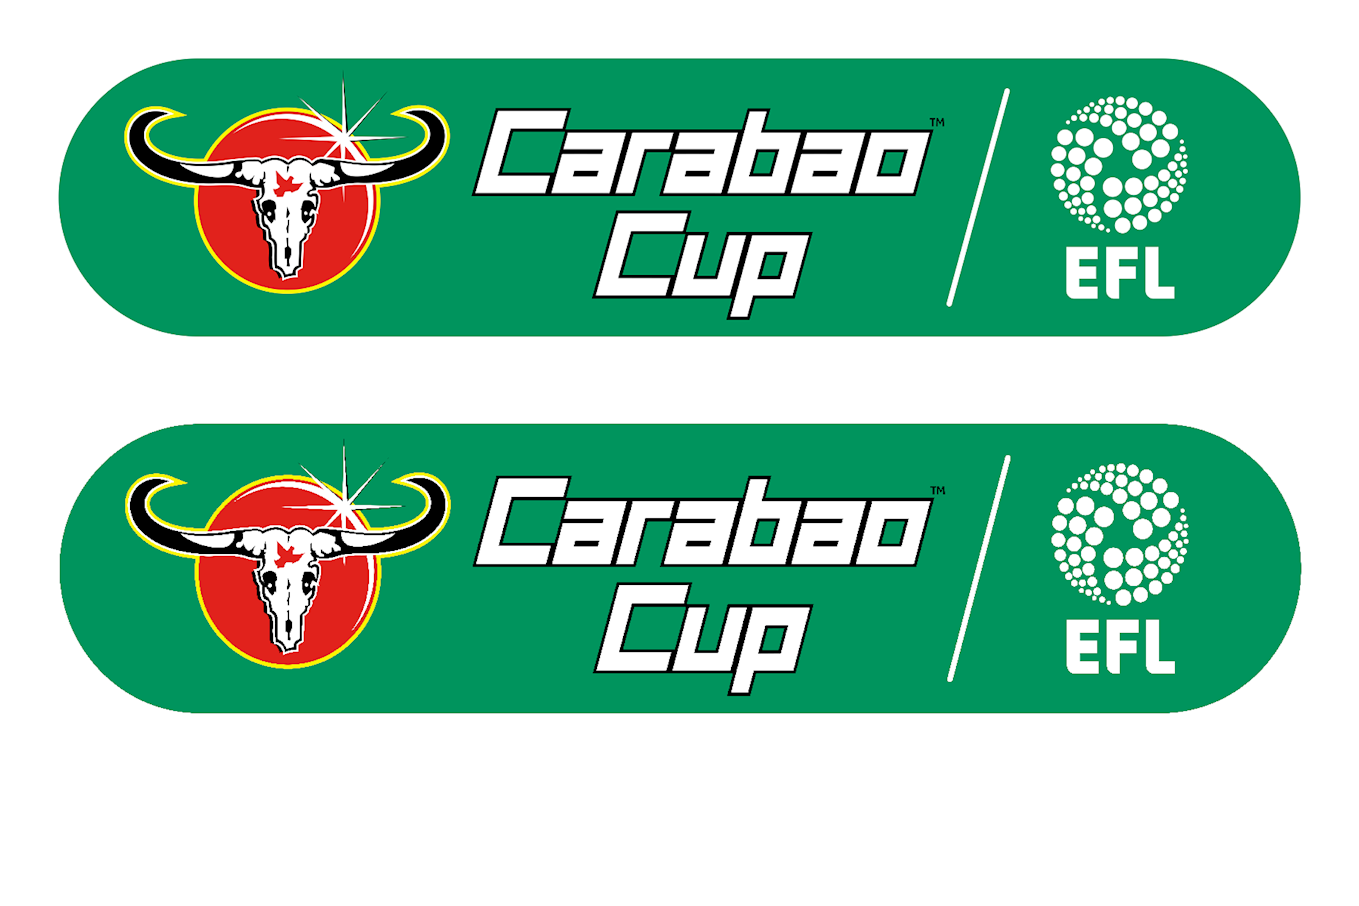 Carabao Cup First Round Draw Confirmed For Friday - News - Bradford City